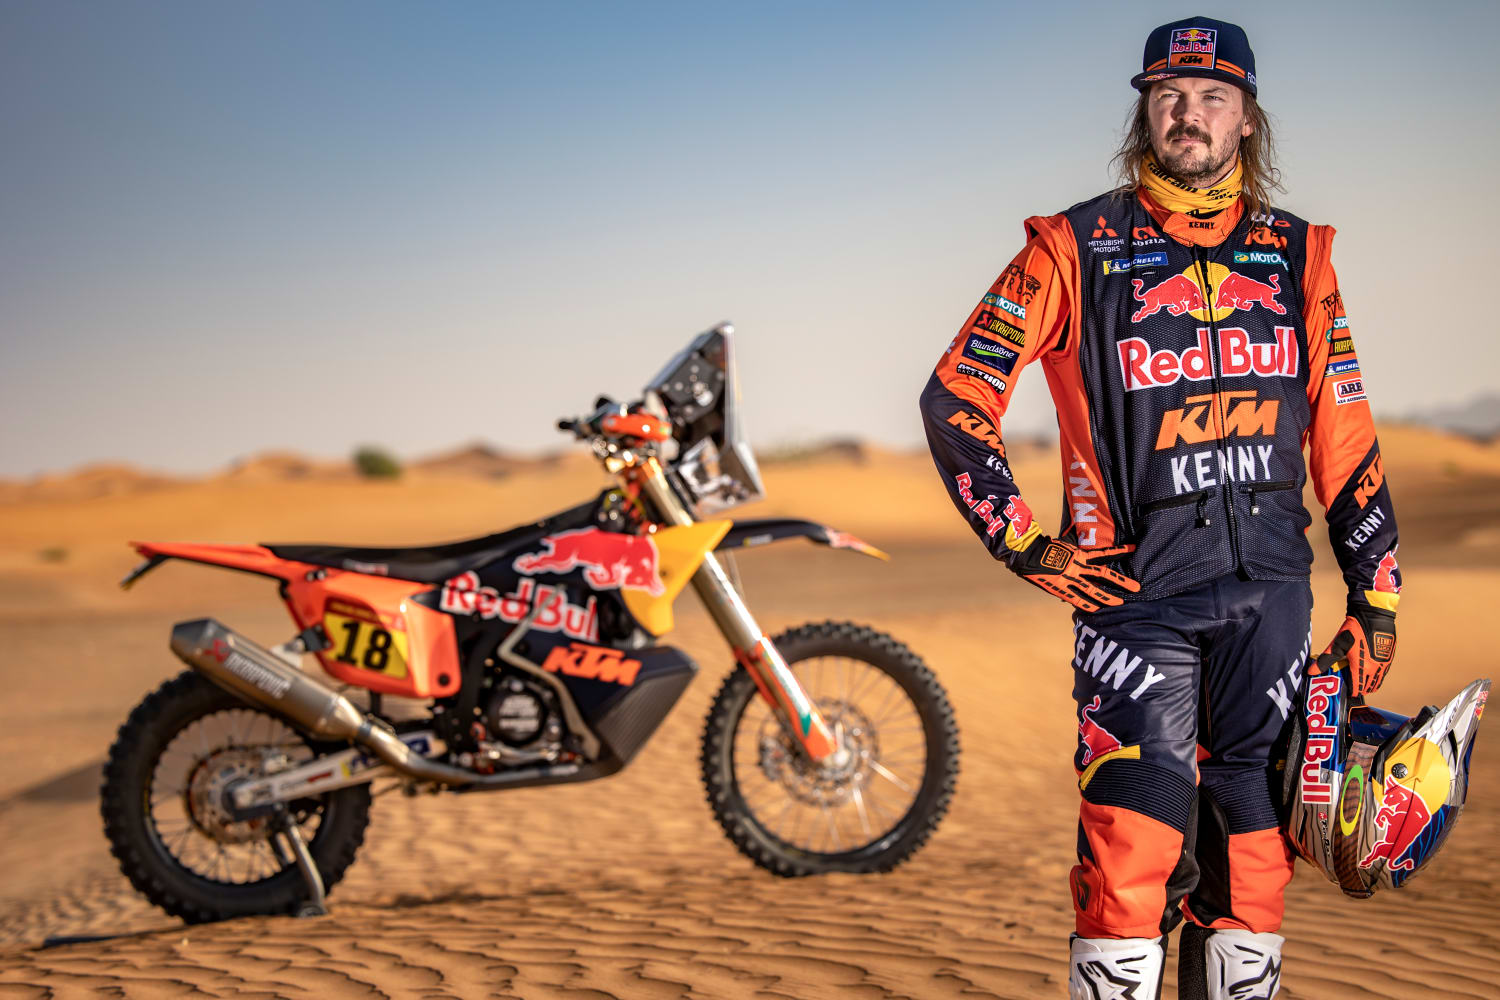 Toby Price: Offroad motorcycle – Red Bull Athlete Page